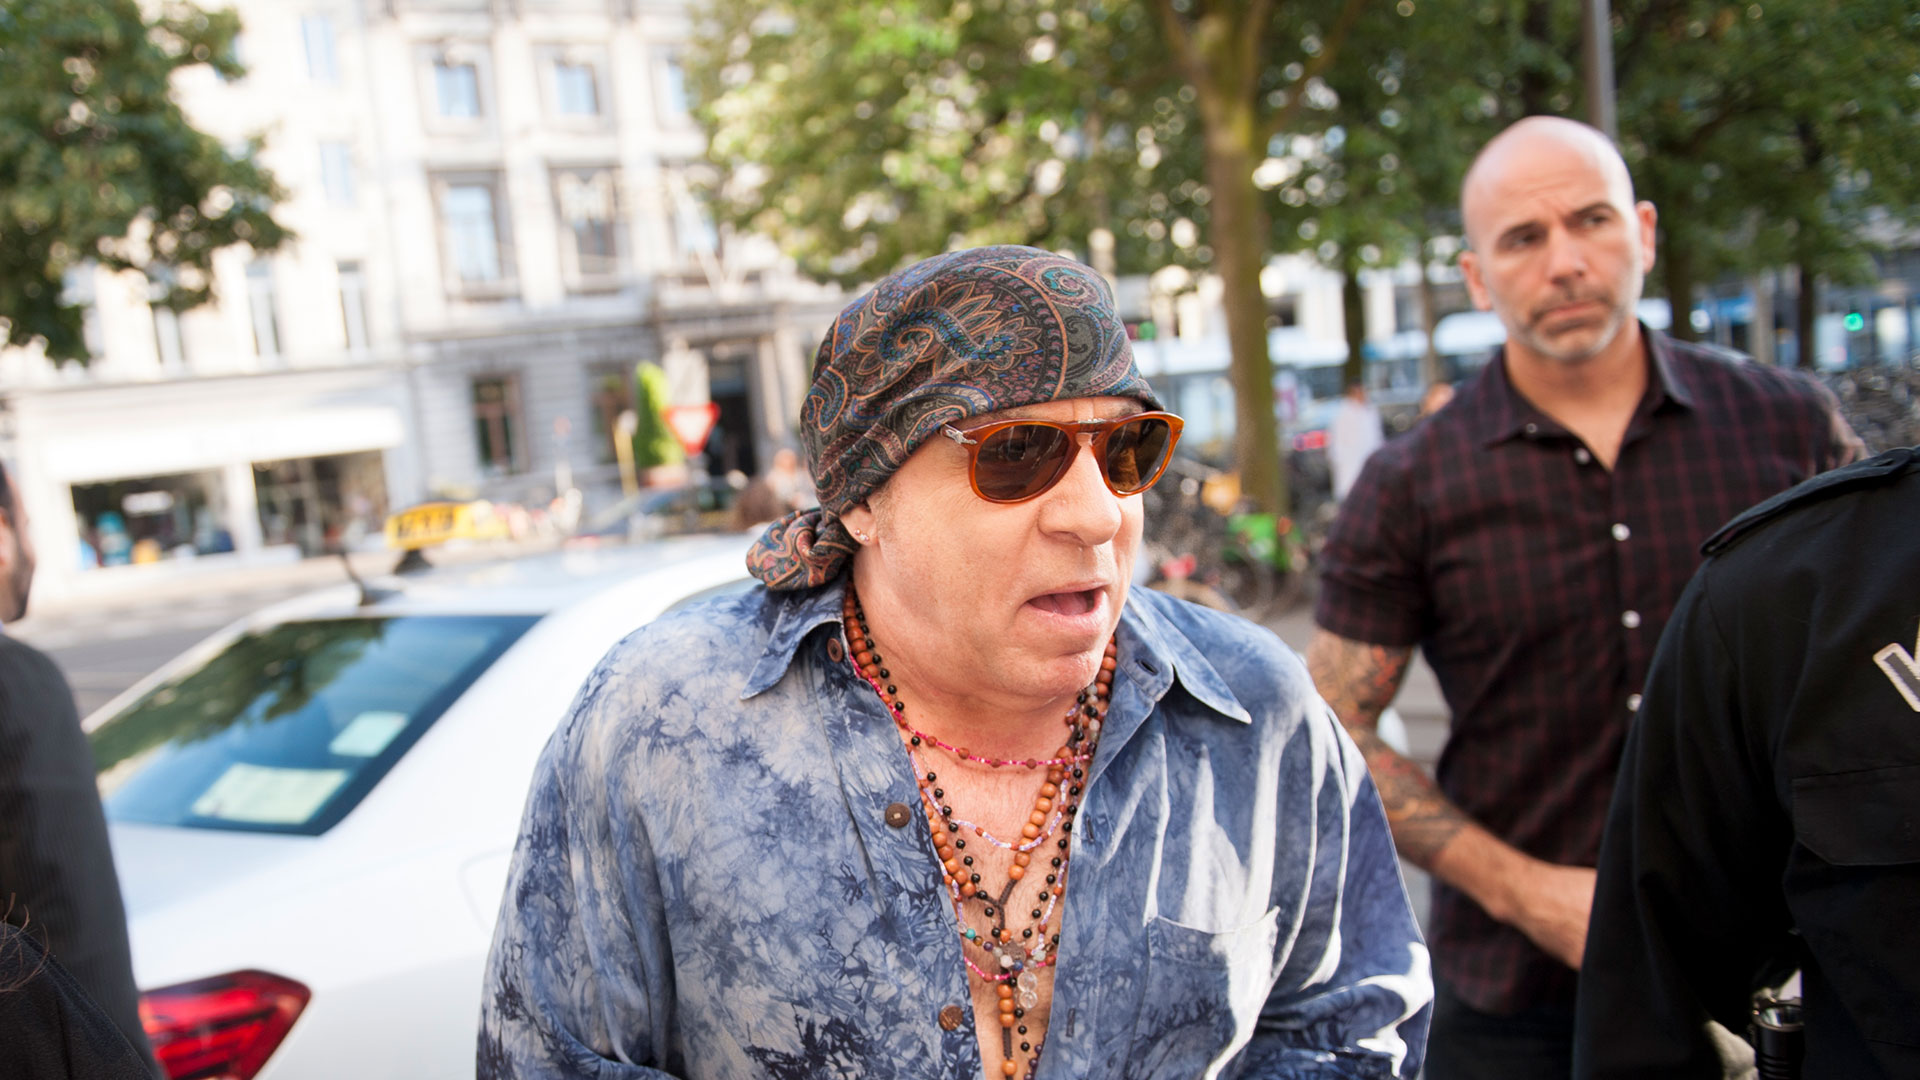 Five things we learned from E Street Band legend Steven Van Zandt - The ...